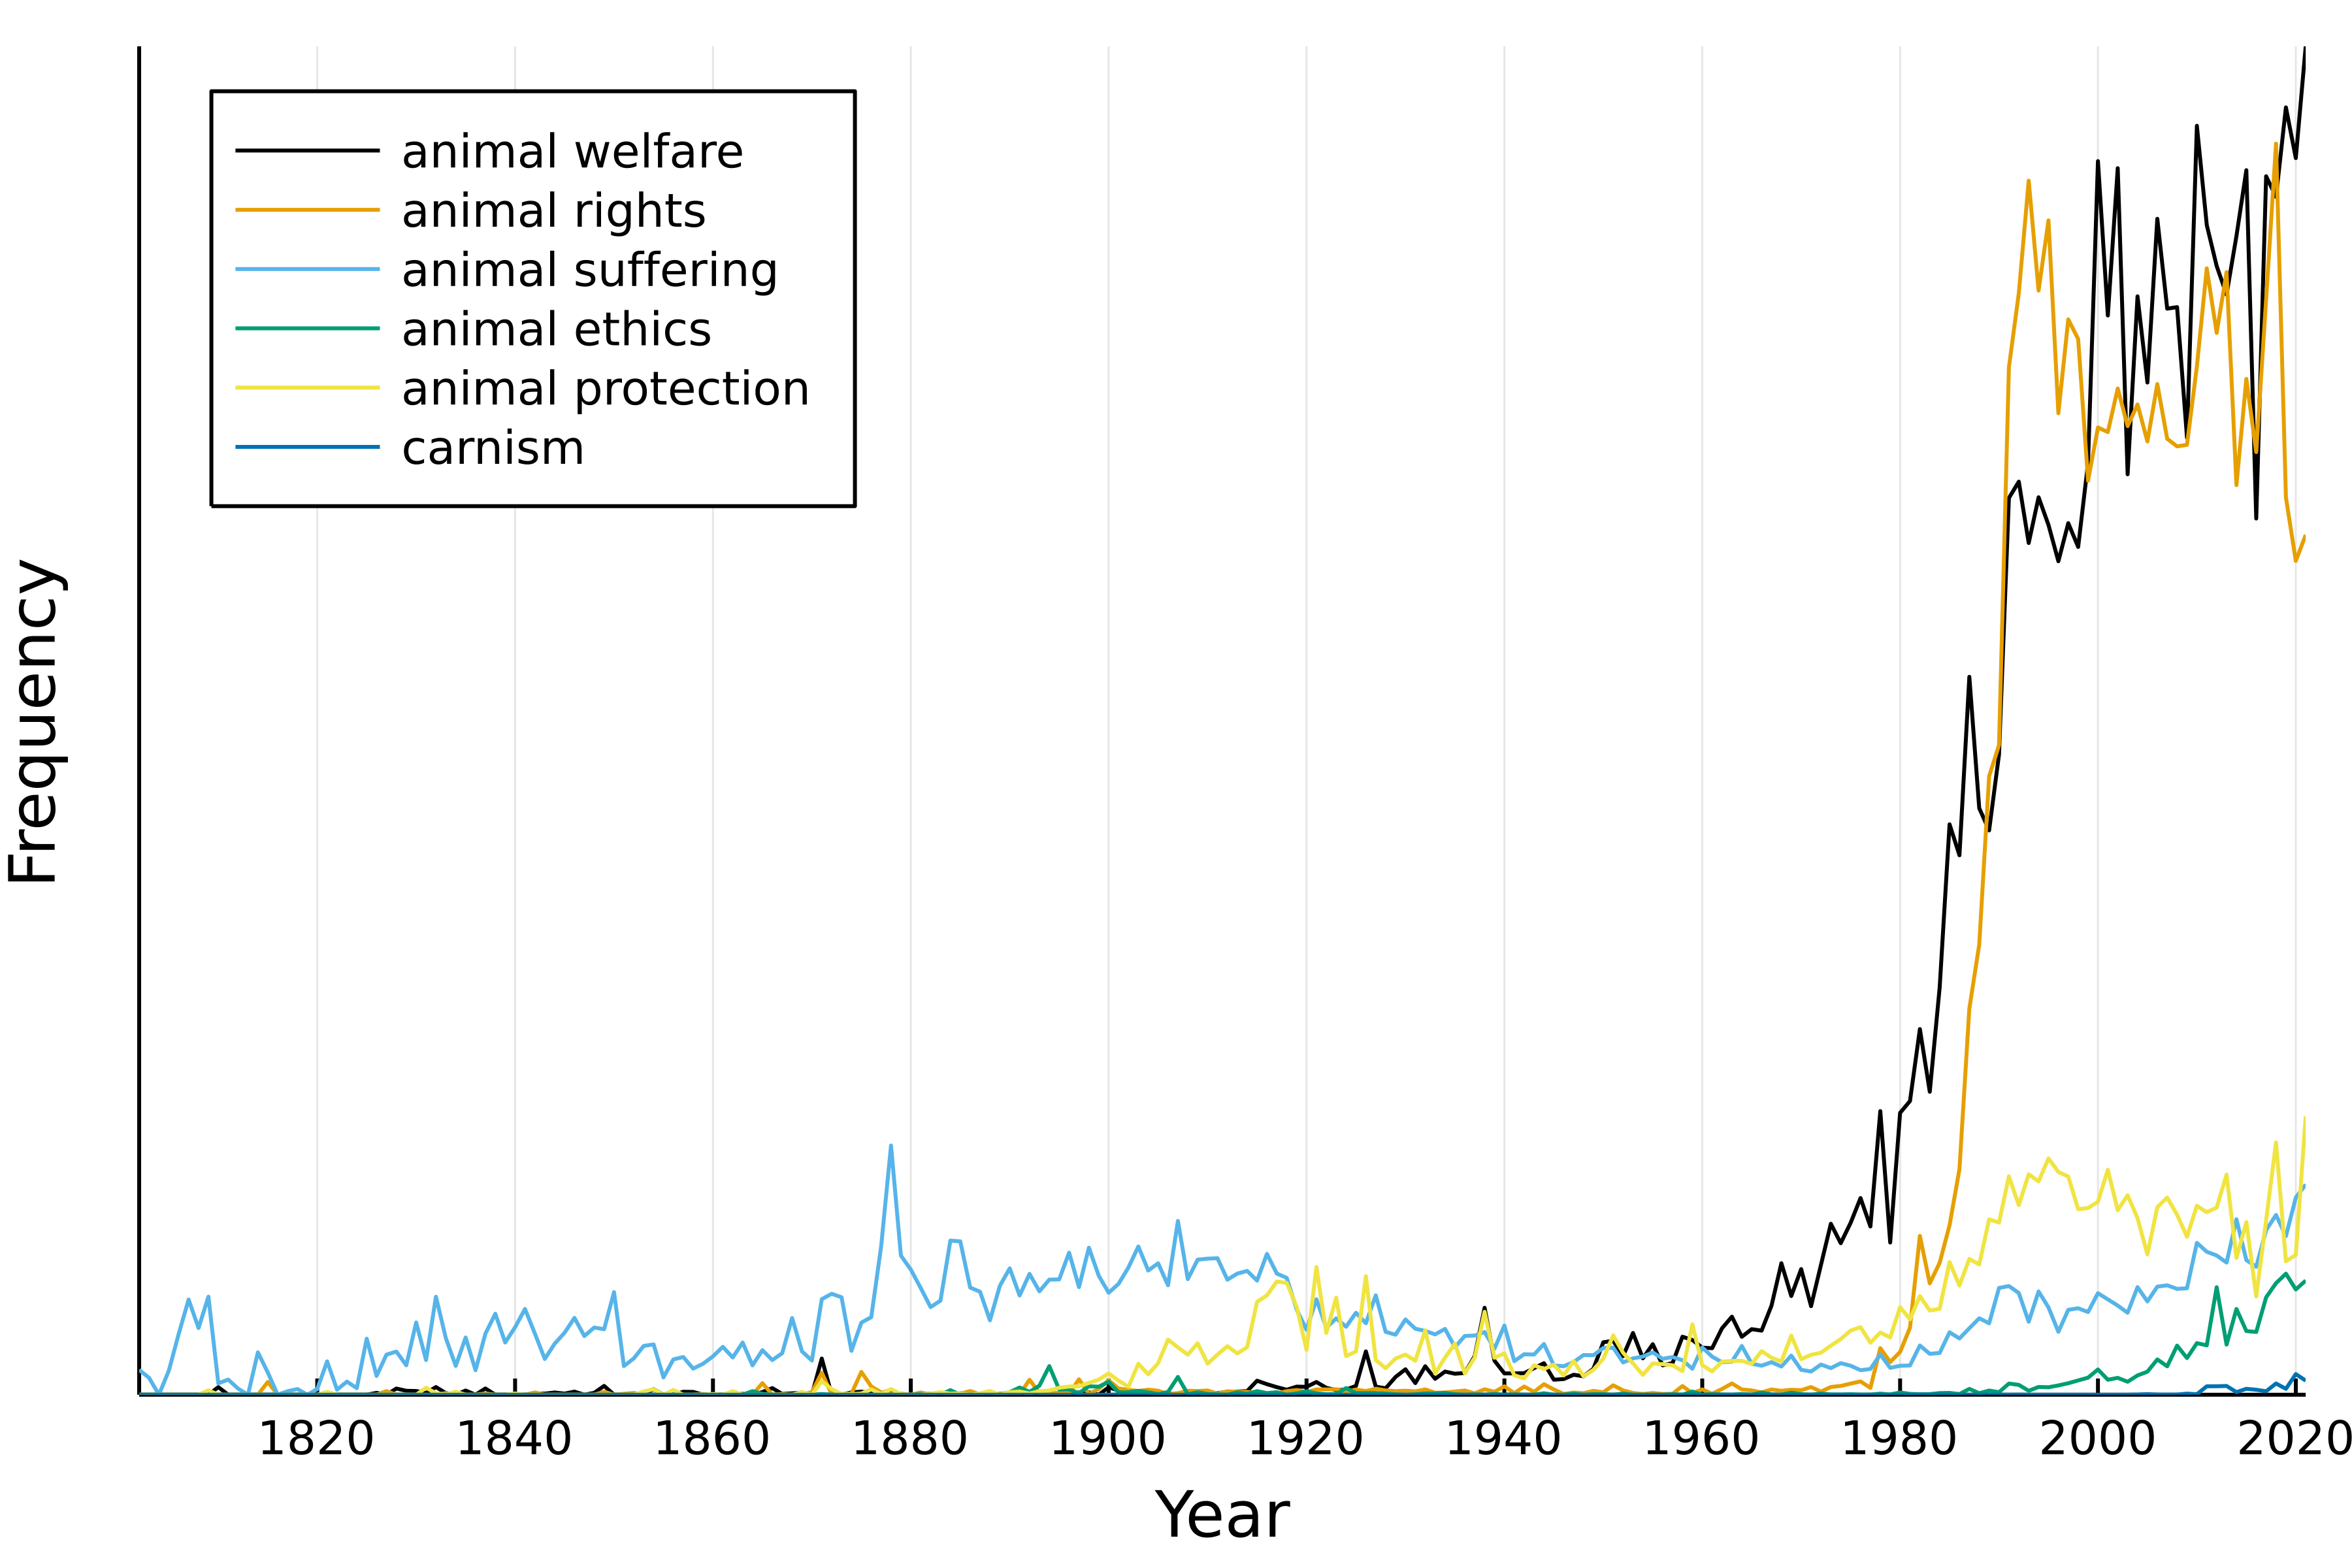 Plot of Google Ngram frequencies of various animal ethics terms during the last 220 years.